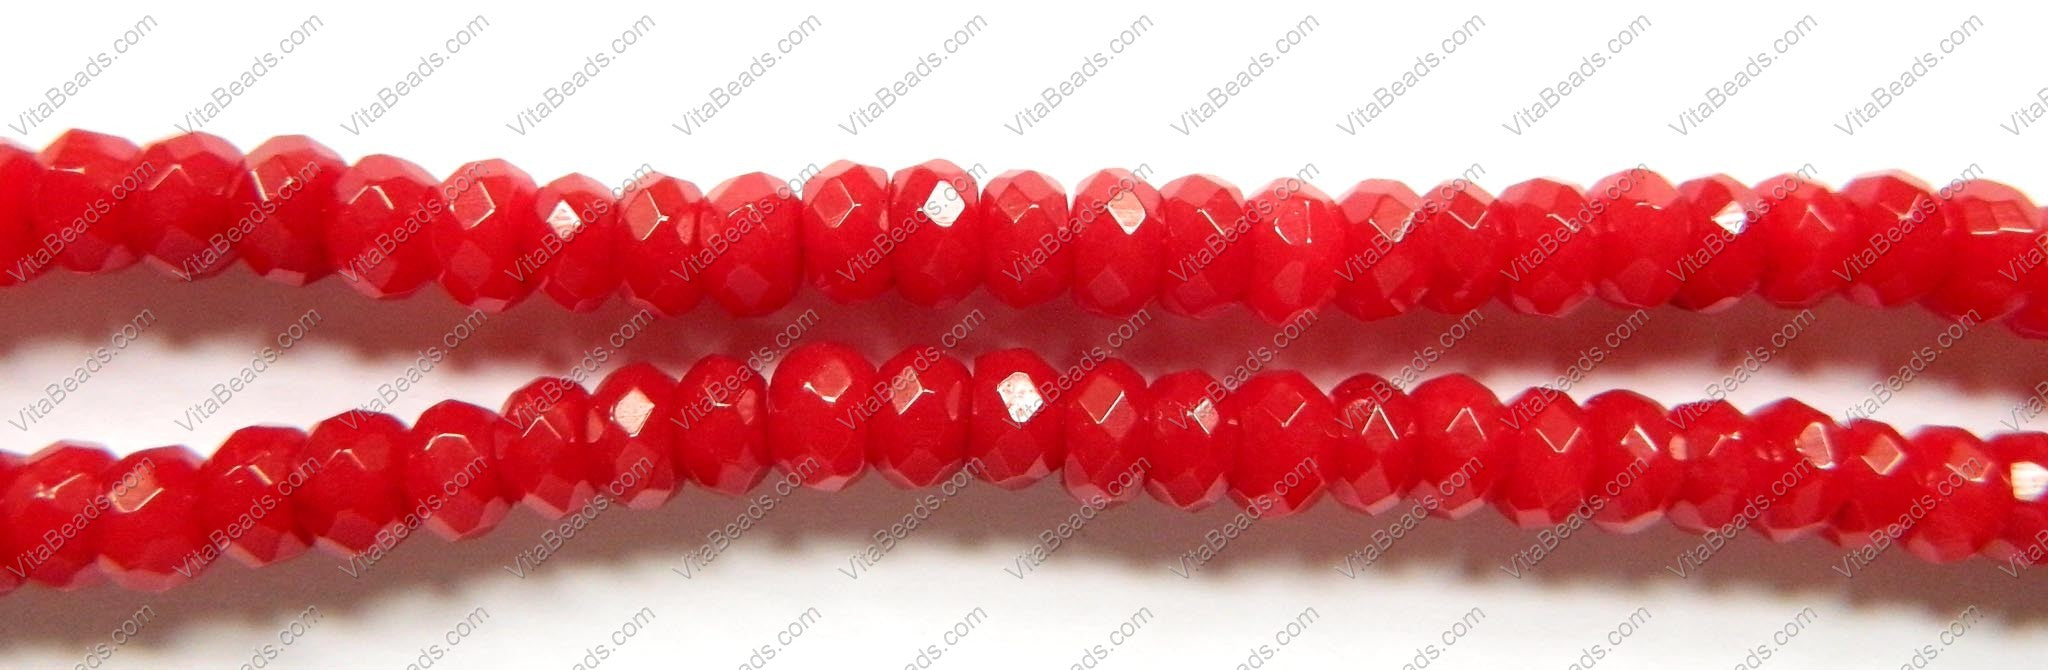 Xmas Red Jade  -  Faceted Rondels  16"    5 x 8 mm